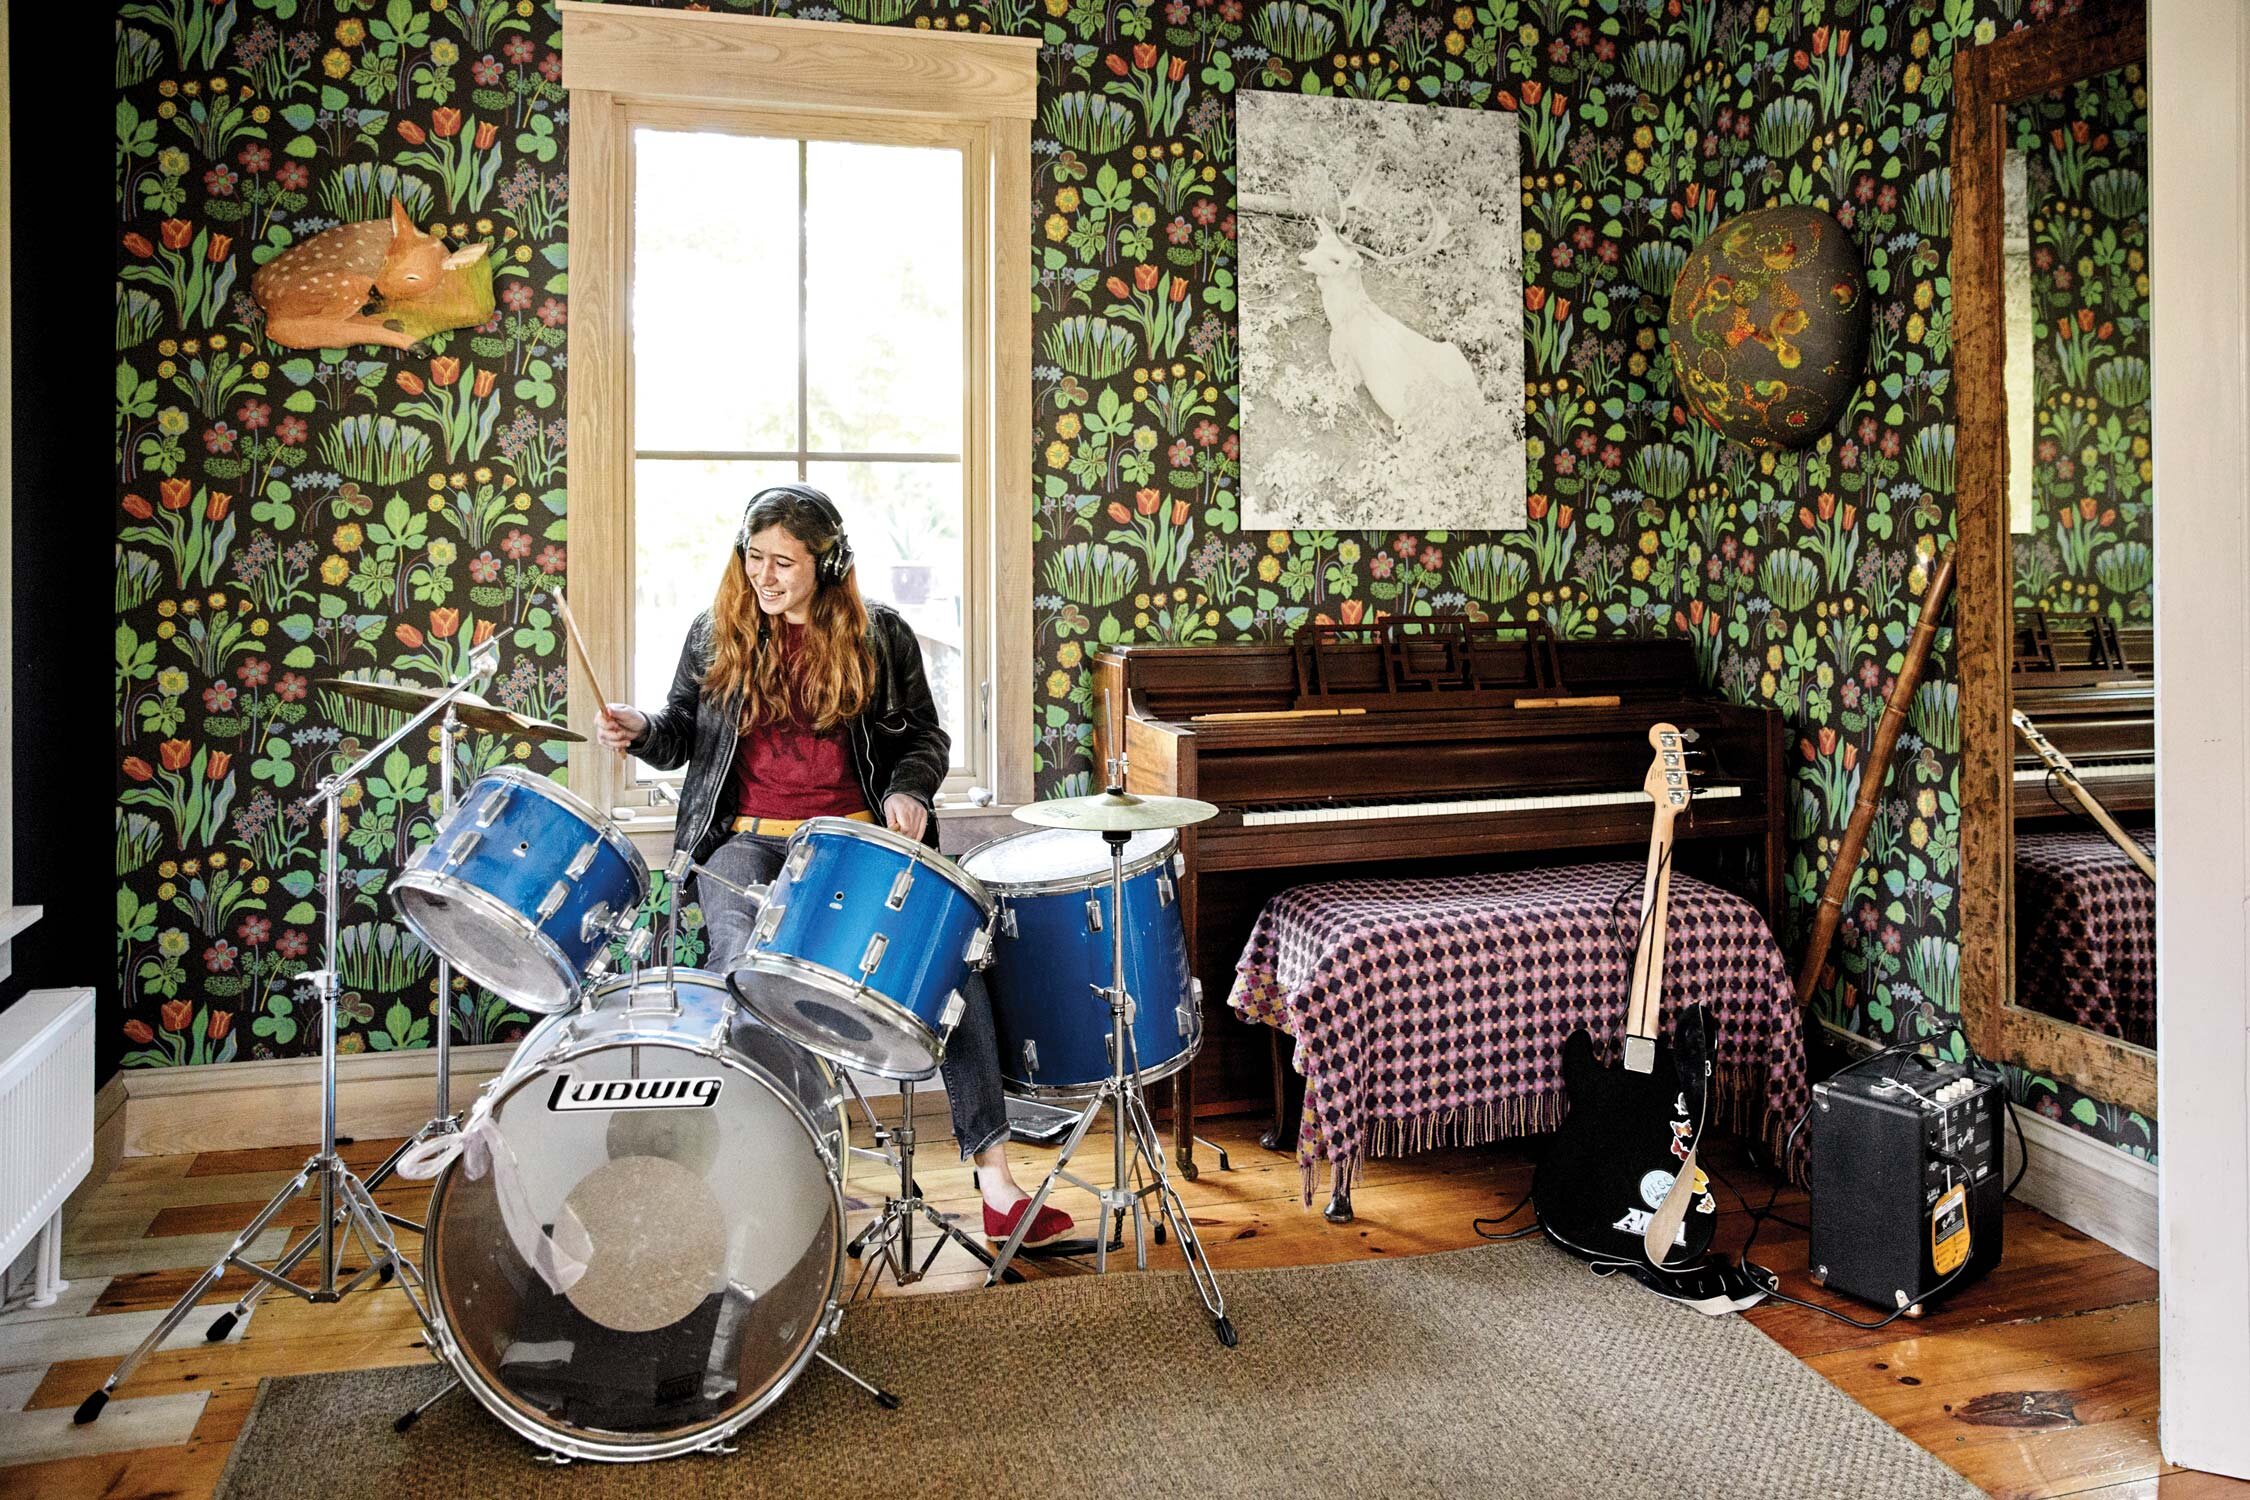 Pearl in foyer. Wallpaper by Josef Frank. Bright Deer by Dylan Hausthor. Fawn fresco by Barbara Sullivan. Nature Dome, embroidered and mixed media, by Juliet Karelsen. Accent series five-piece drum kit in classic blue sparkle by Ludwig.